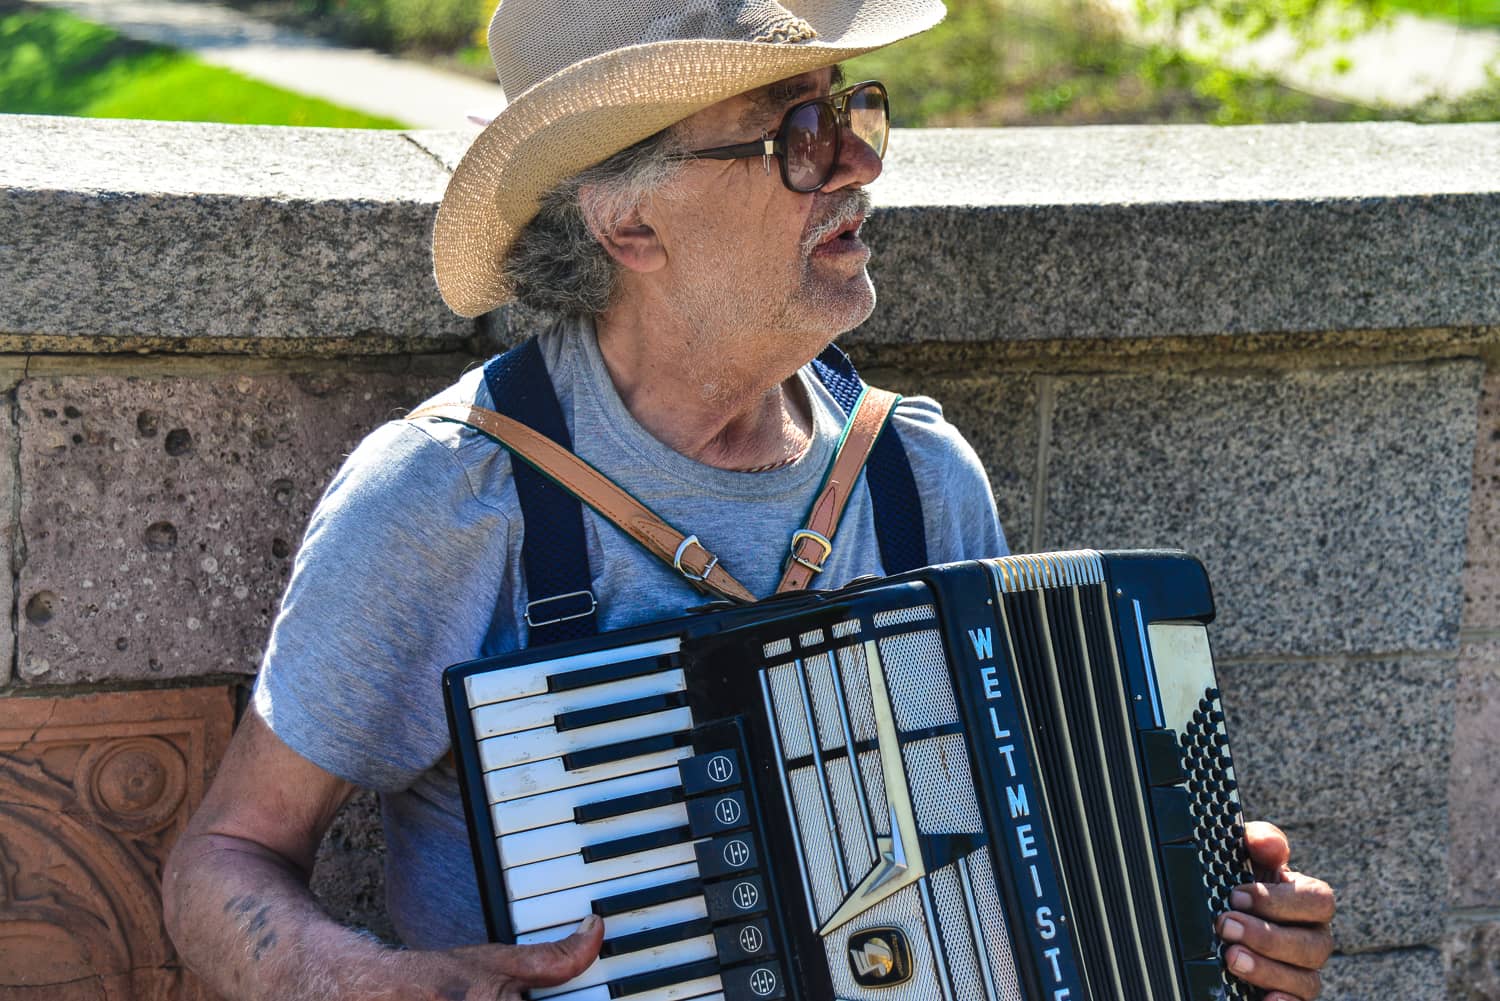 We cross the bridge into the park with an accompaniment by this busker.